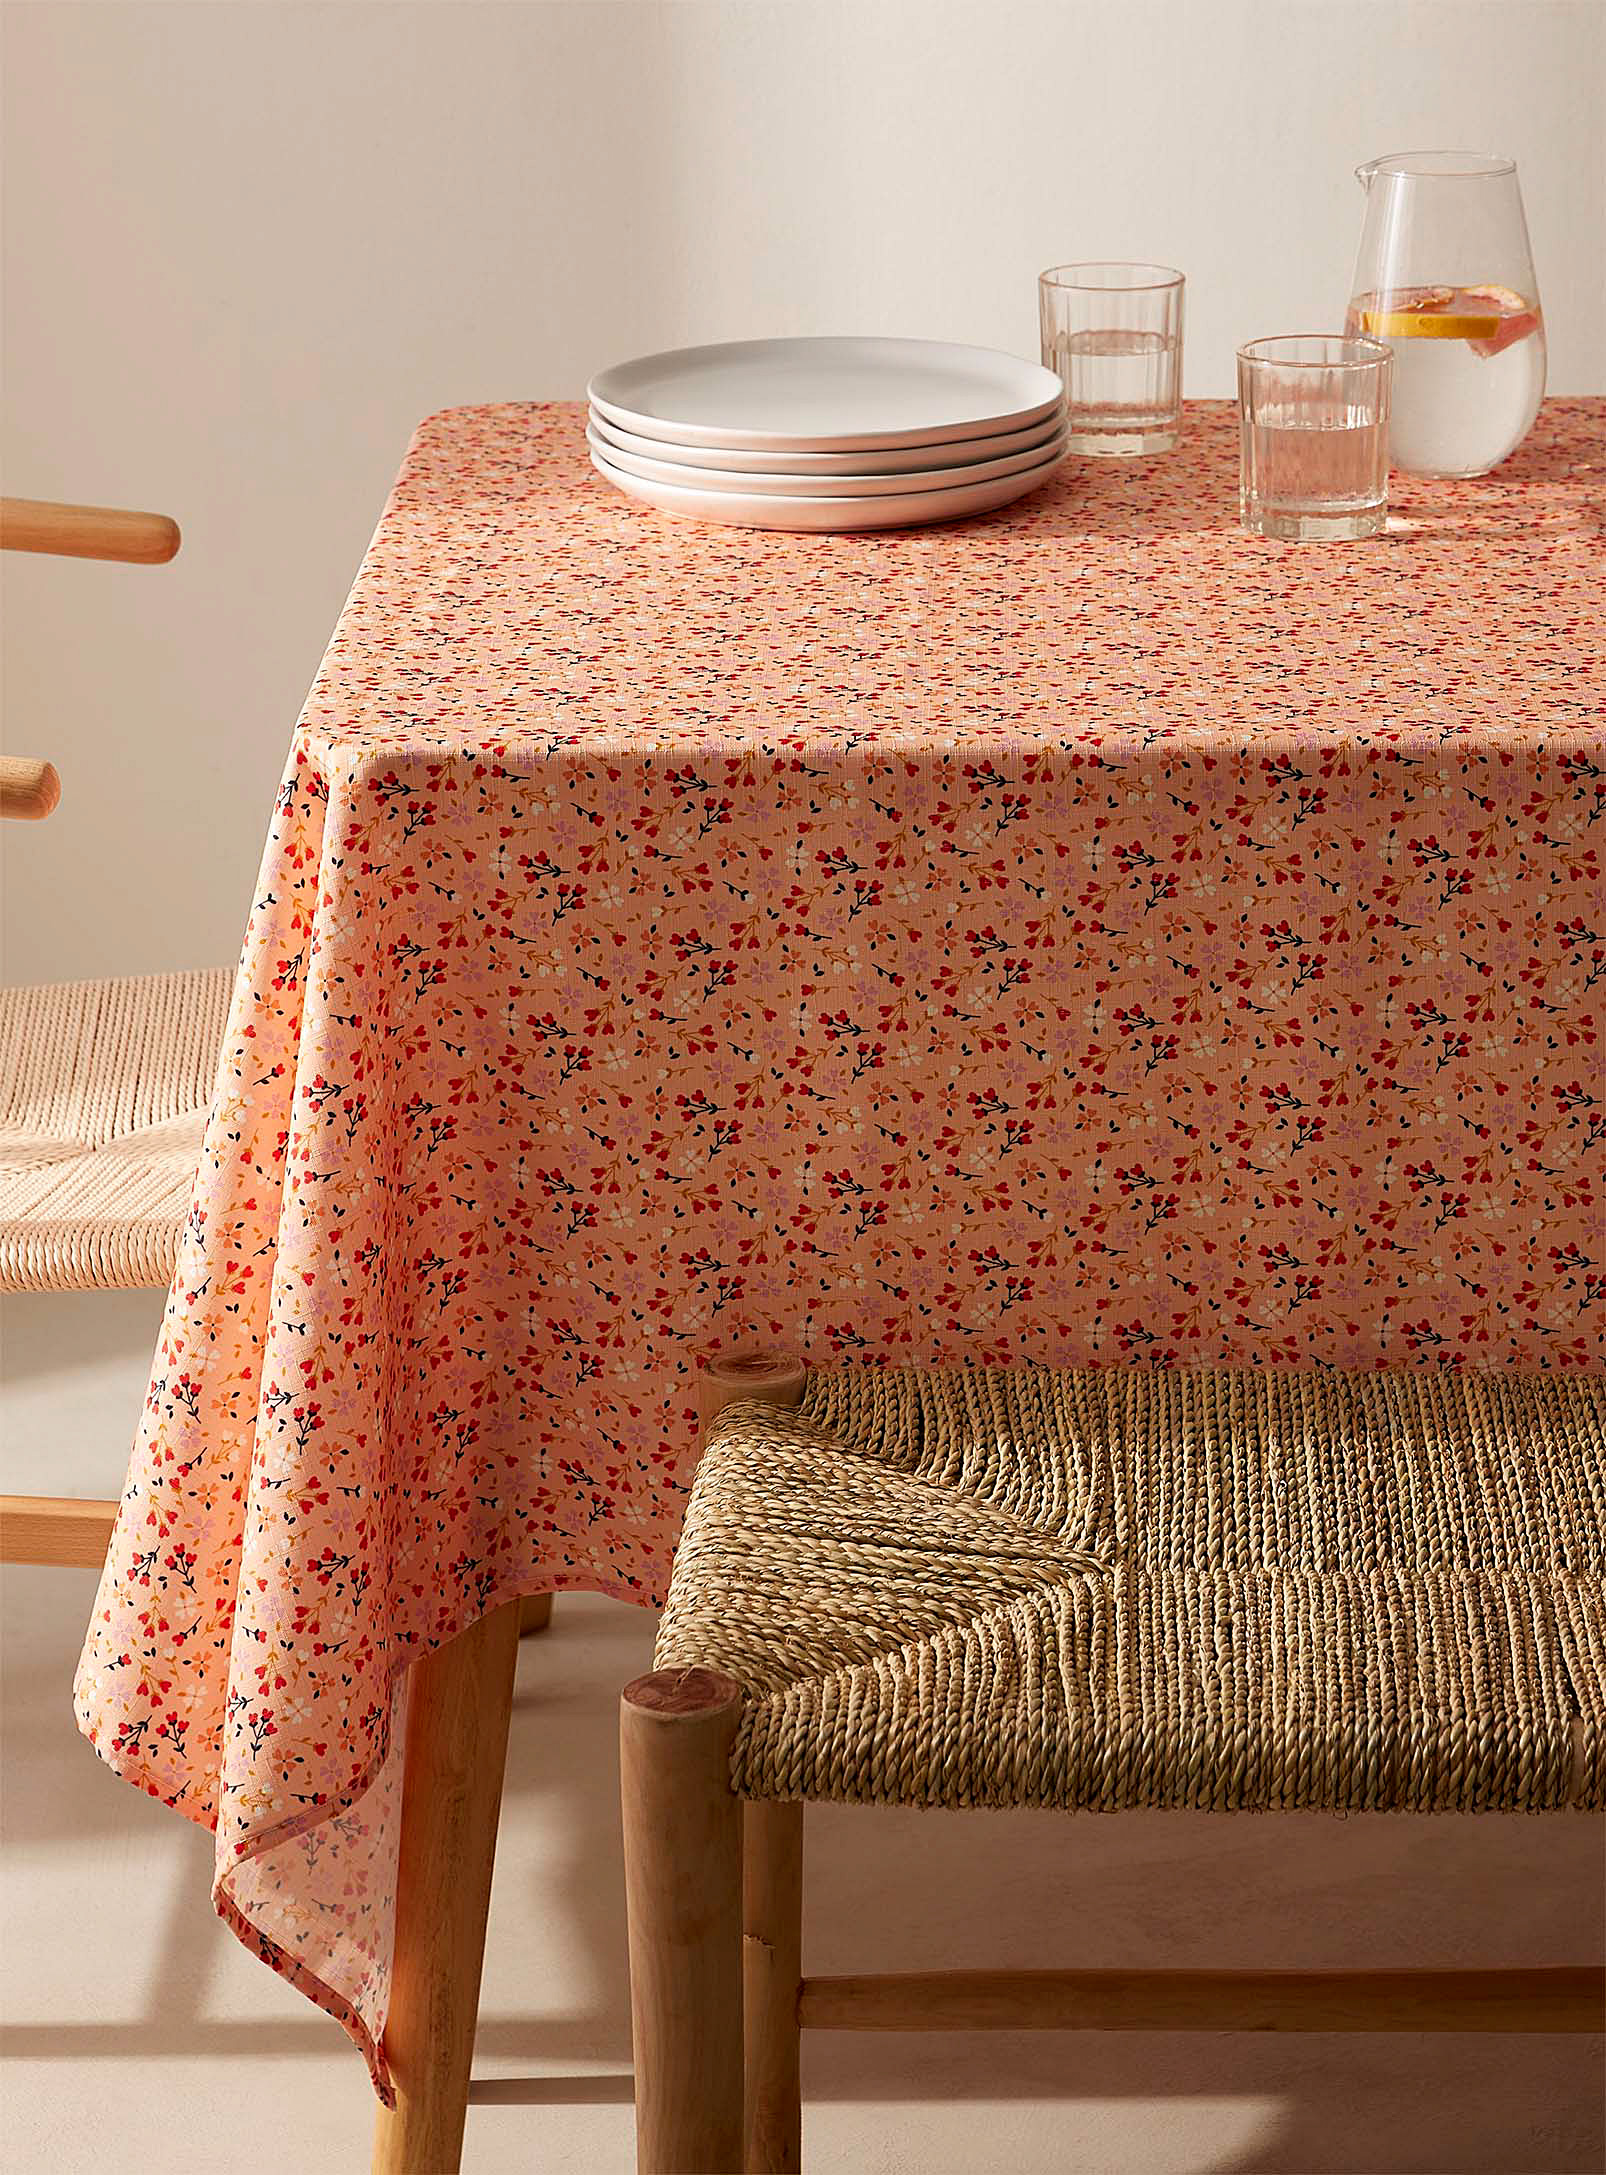 Simons Maison Field Of Love Recycled Polyester Tablecloth In Assorted